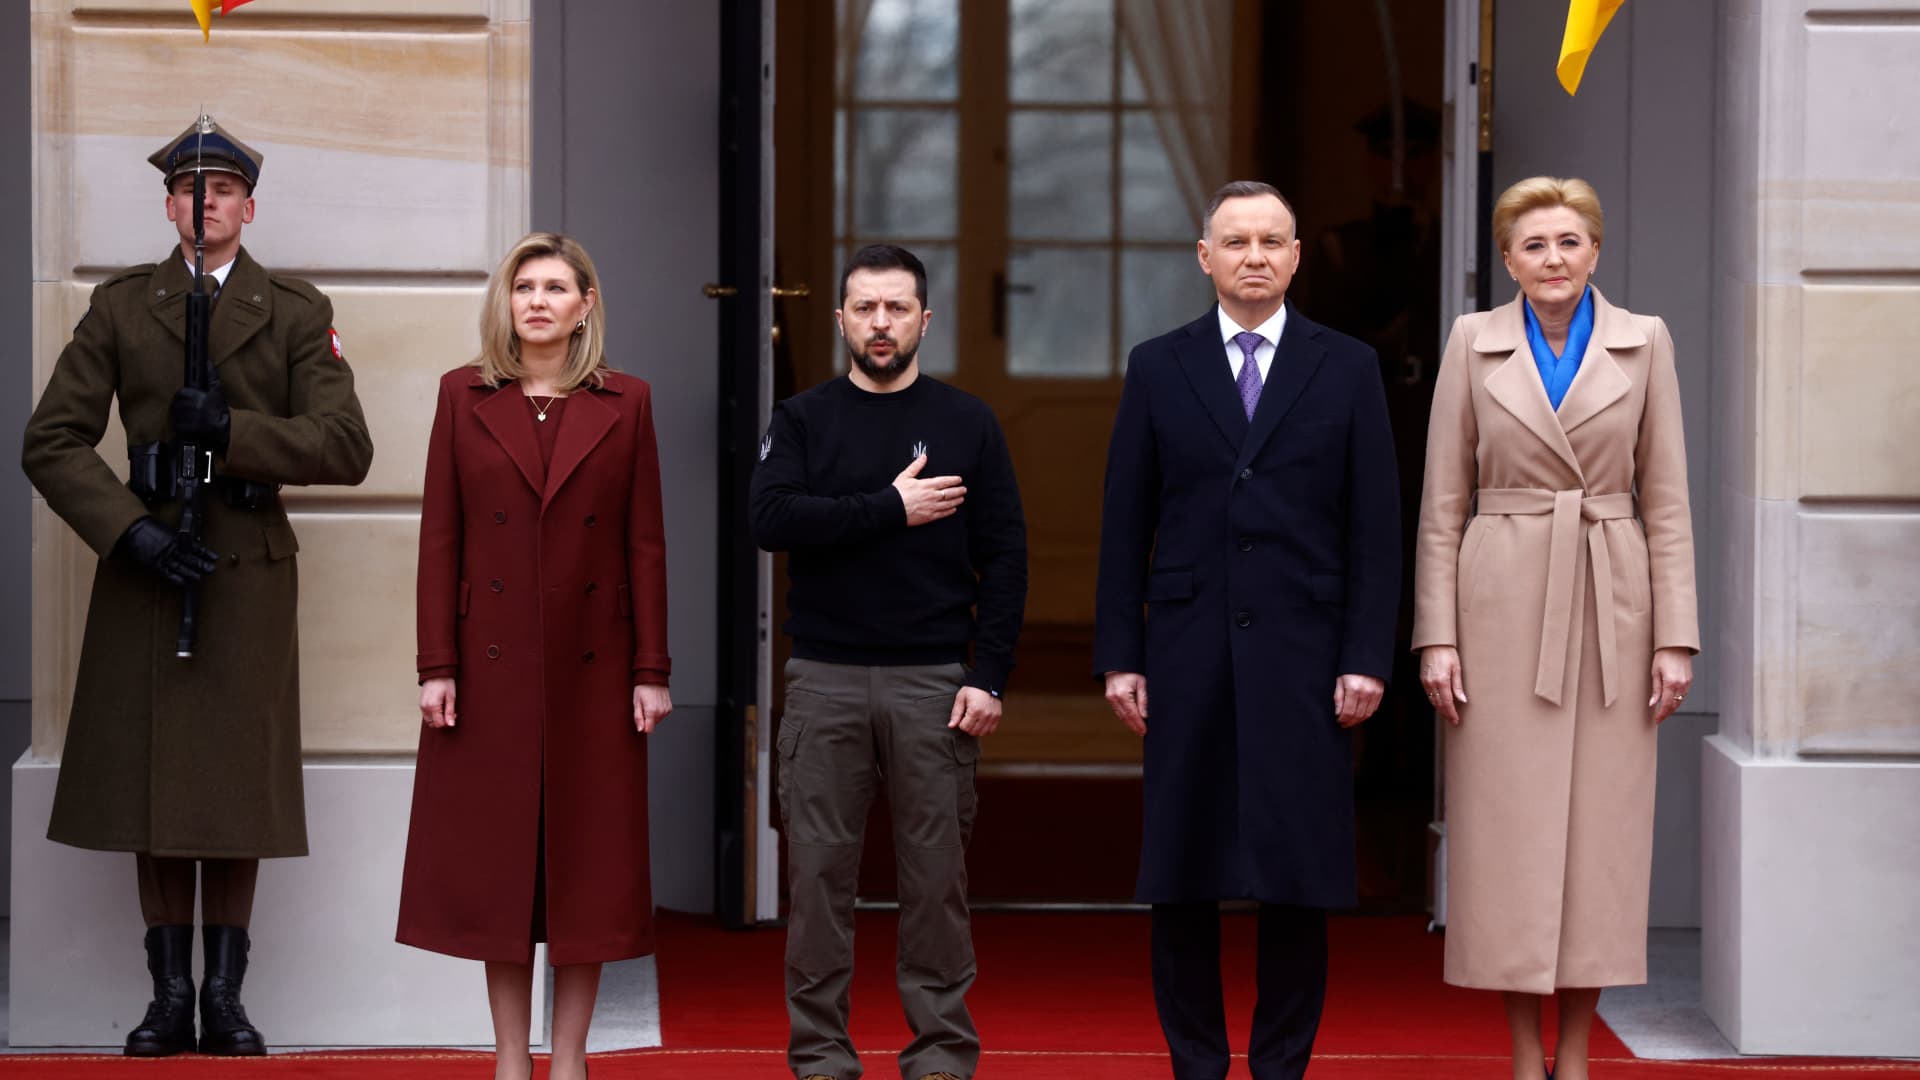 Polish President Andrzej Duda (2ndR) and his wife Agata Kornhauser-Duda (R) together with Ukrainian President Volodymyr Zelensky (C) and his wife Olena Zelenska stand during an official welcoming ceremony in front of the Presidential Palace in Warsaw, Poland, on April 5, 2023. 